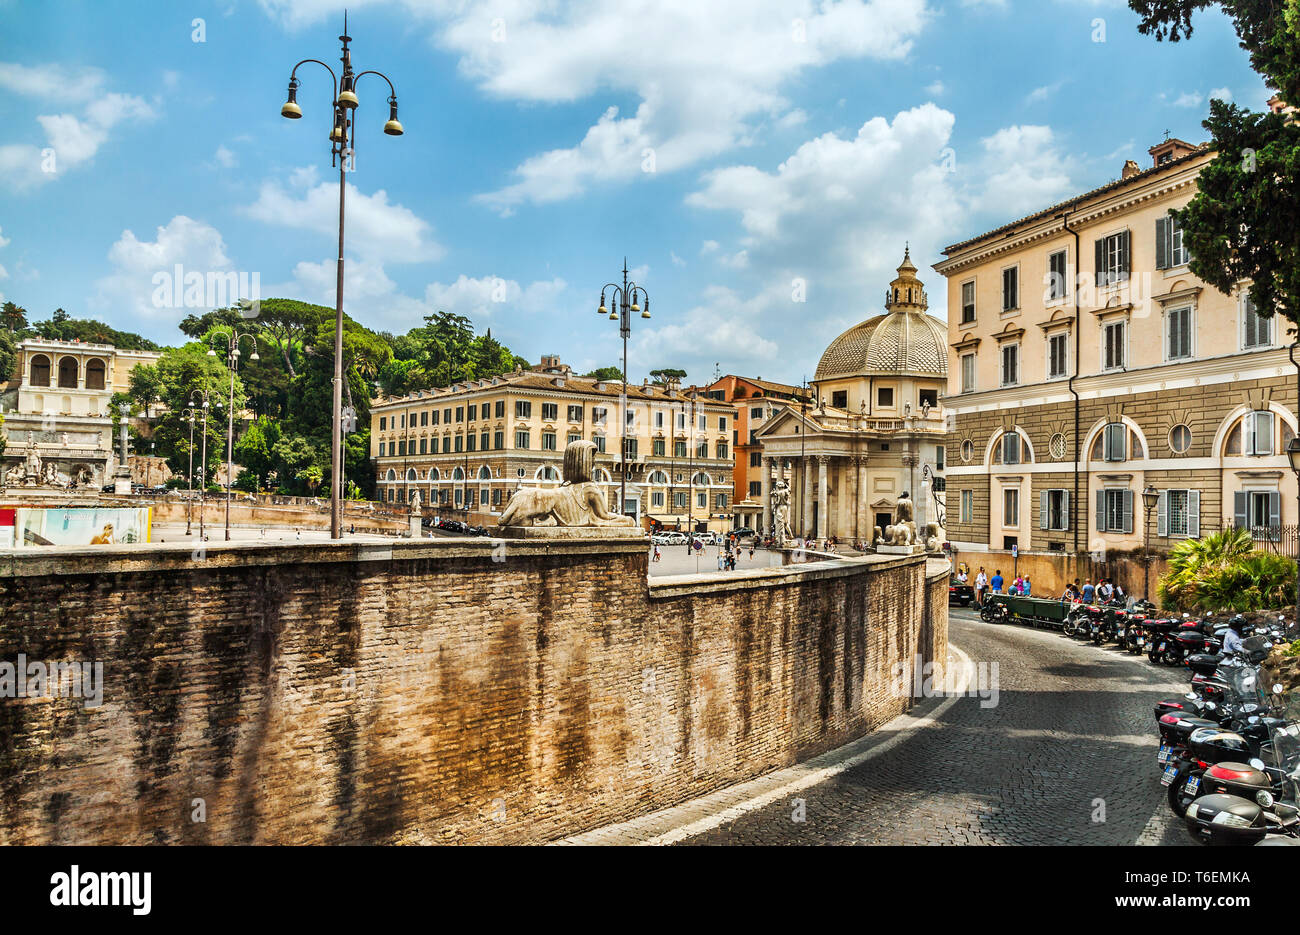 The famous square in Rome Stock Photo